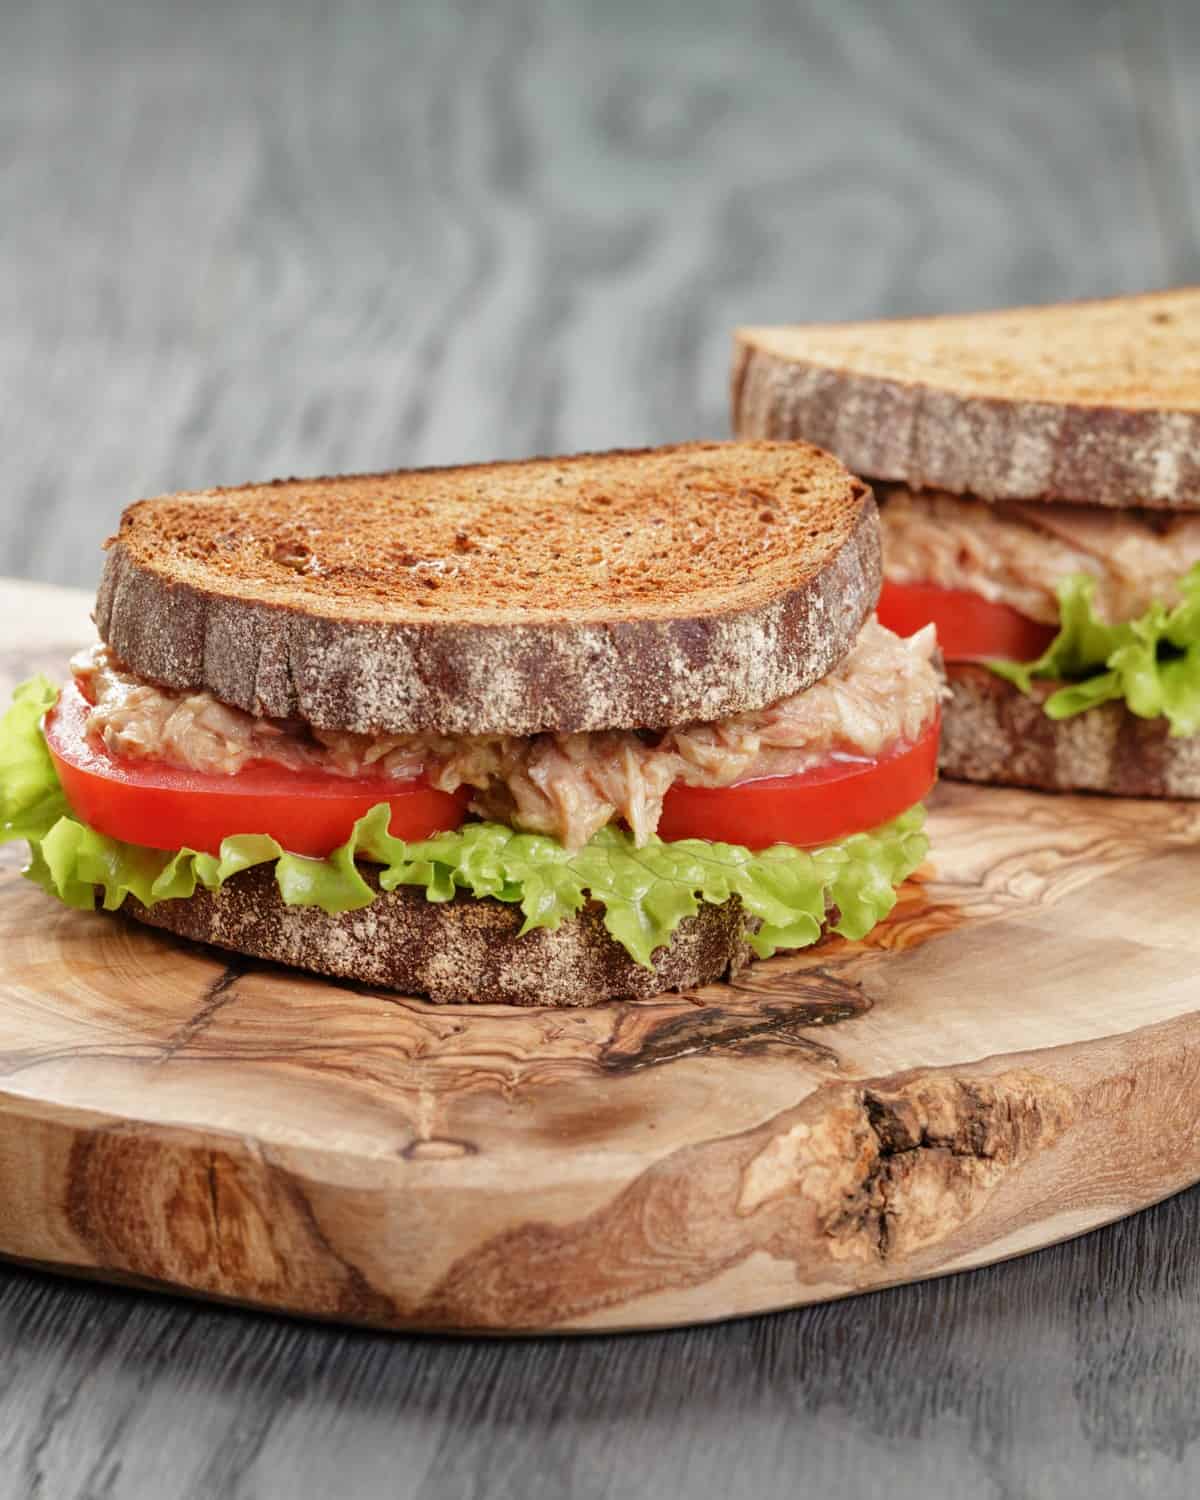 rye bread sandwich filled with tuna, tomatoes and salad.